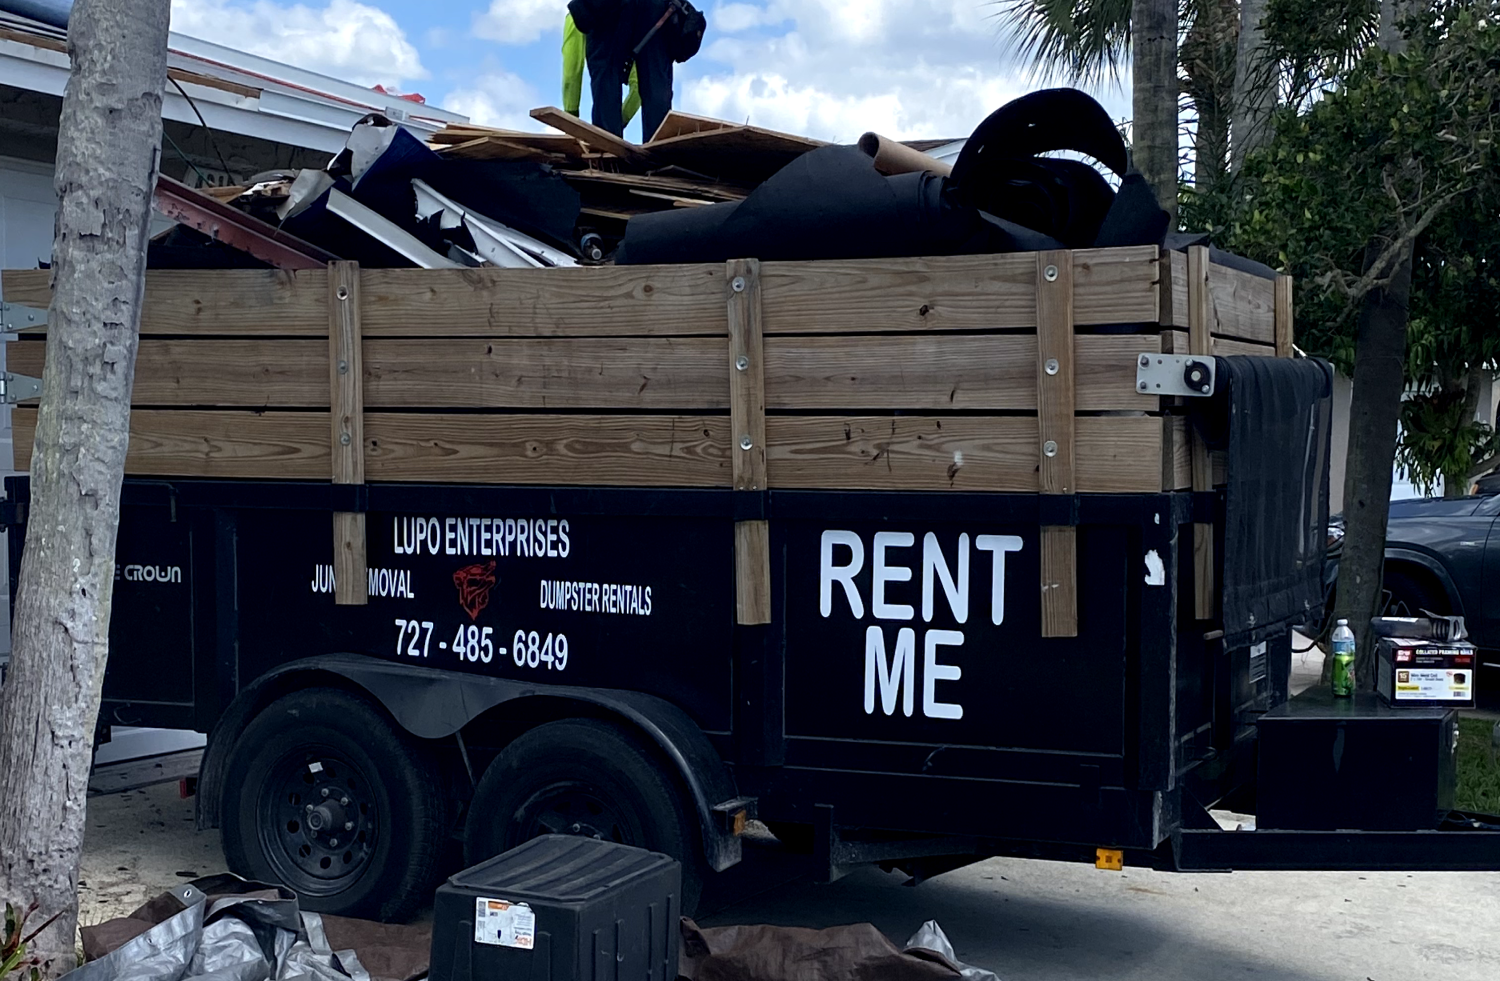 Reliable trash pickup service in Pasco County